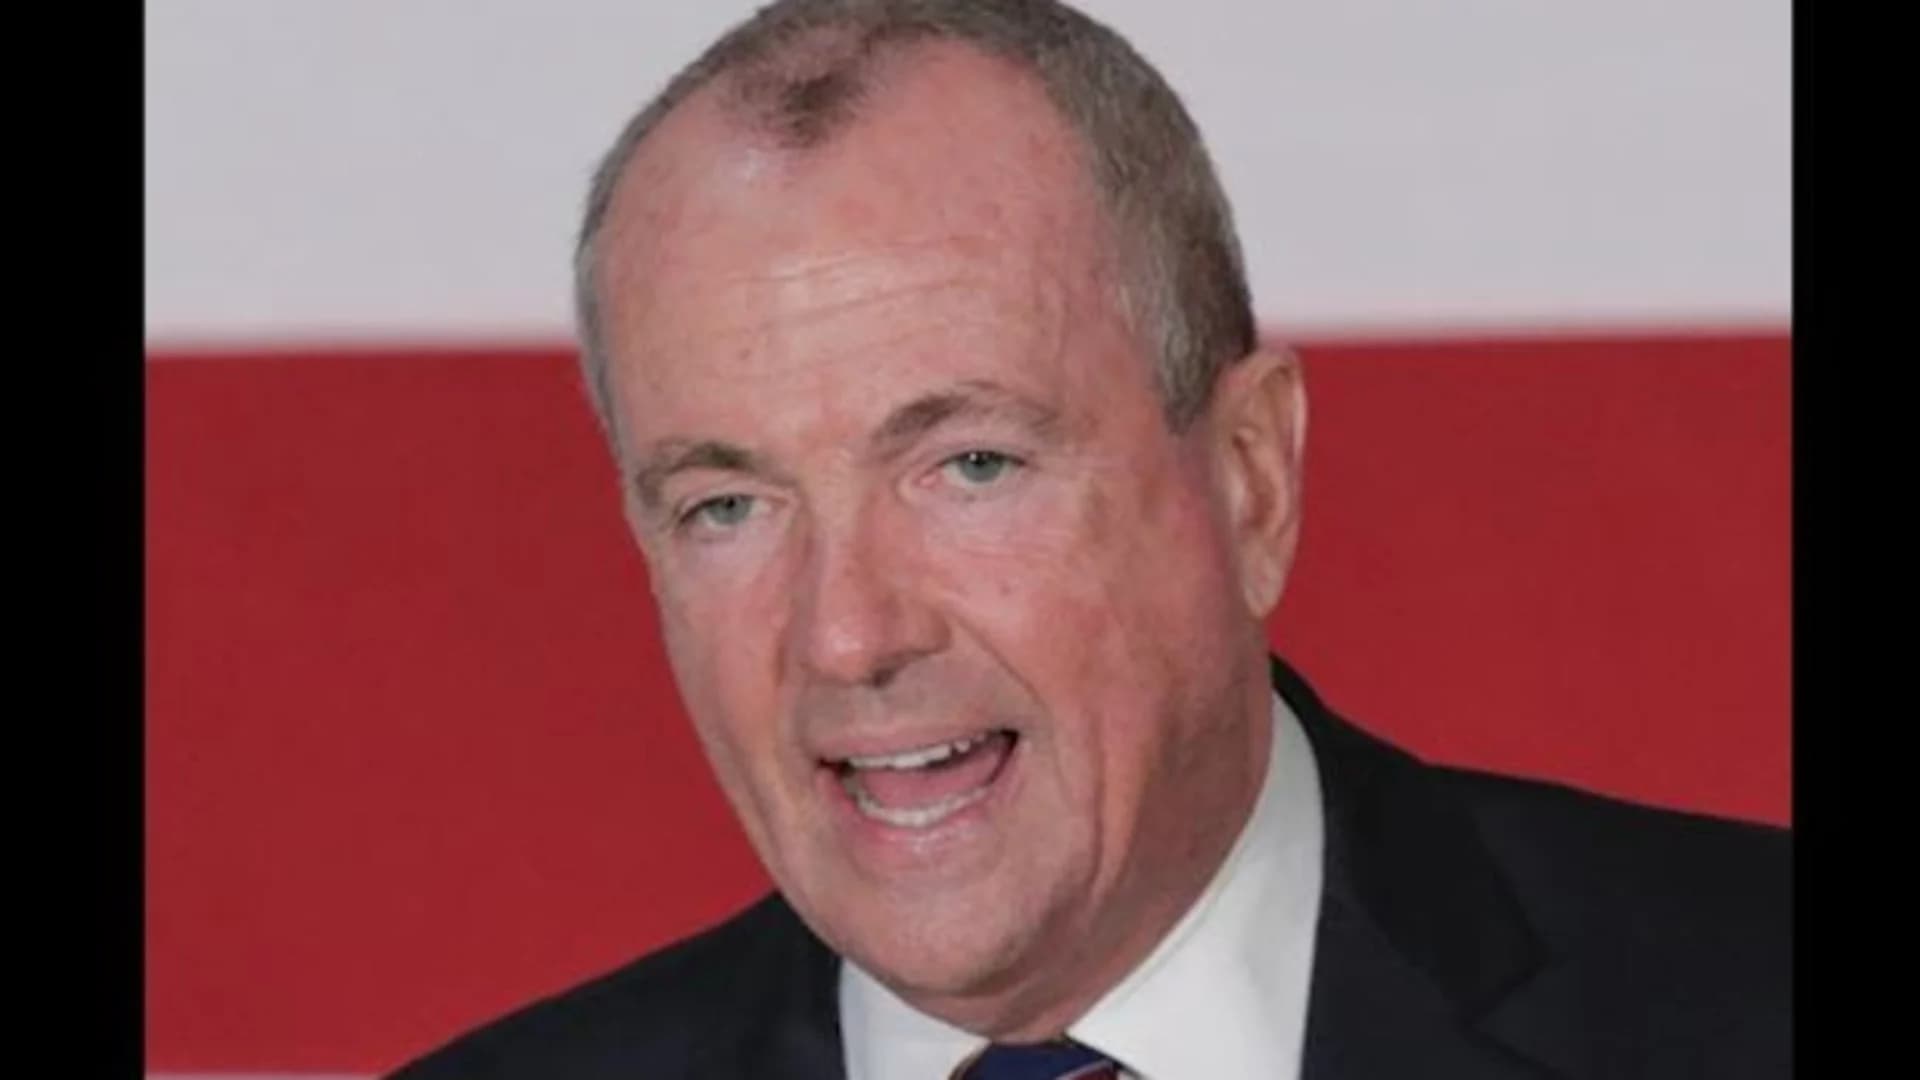 The Grid: Murphy's powerful poll numbers